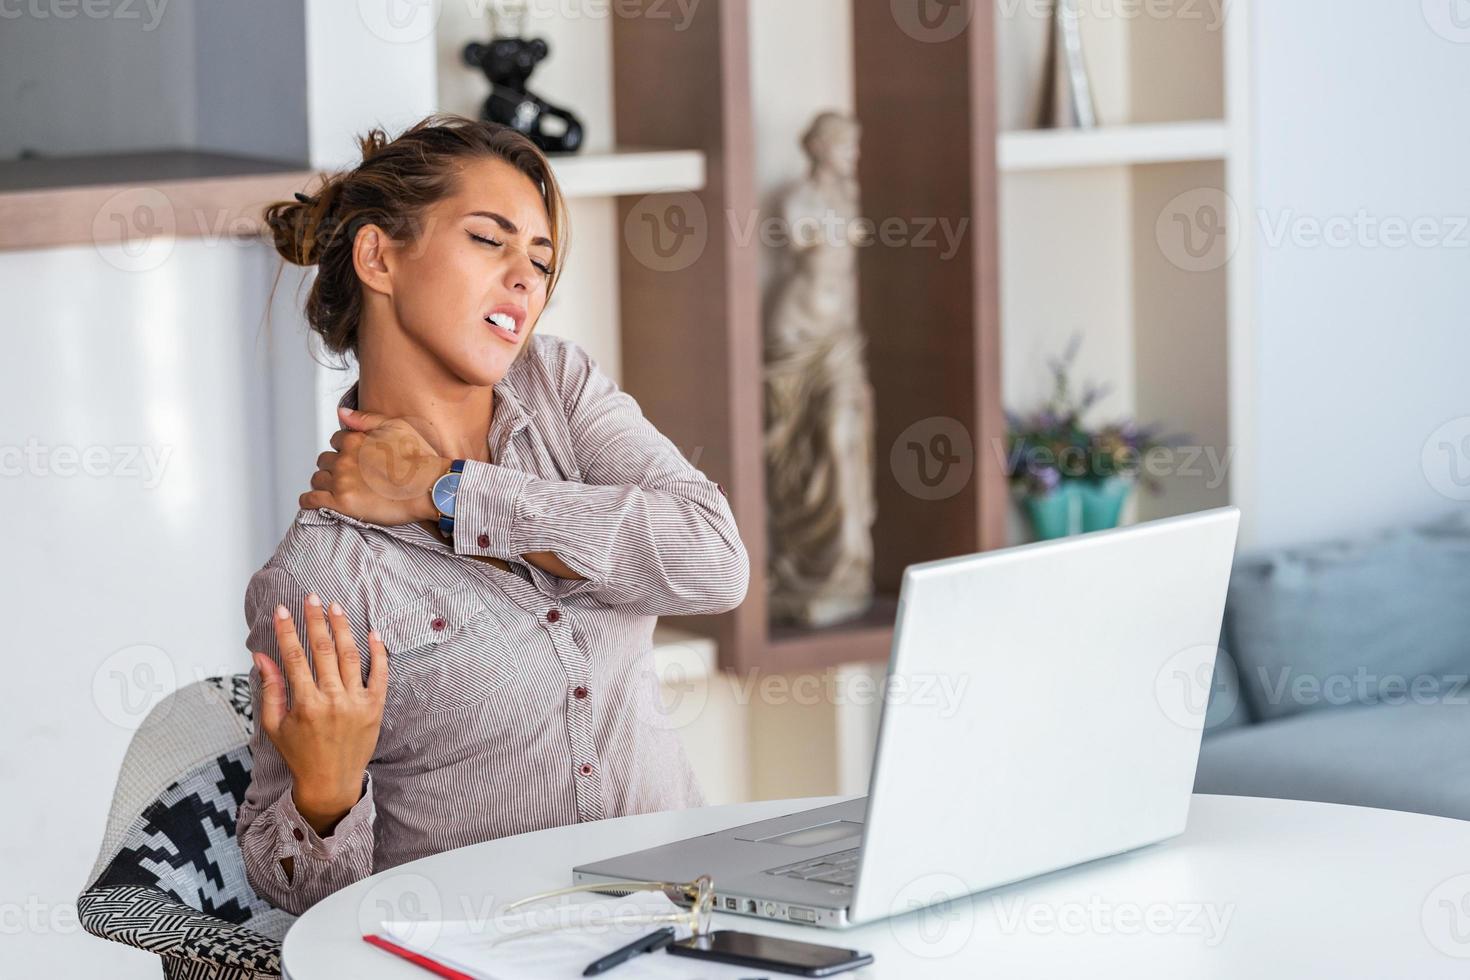 Portrait of young stressed woman sitting at home office desk in front of laptop, touching aching back with pained expression, suffering from backache after working on pc photo